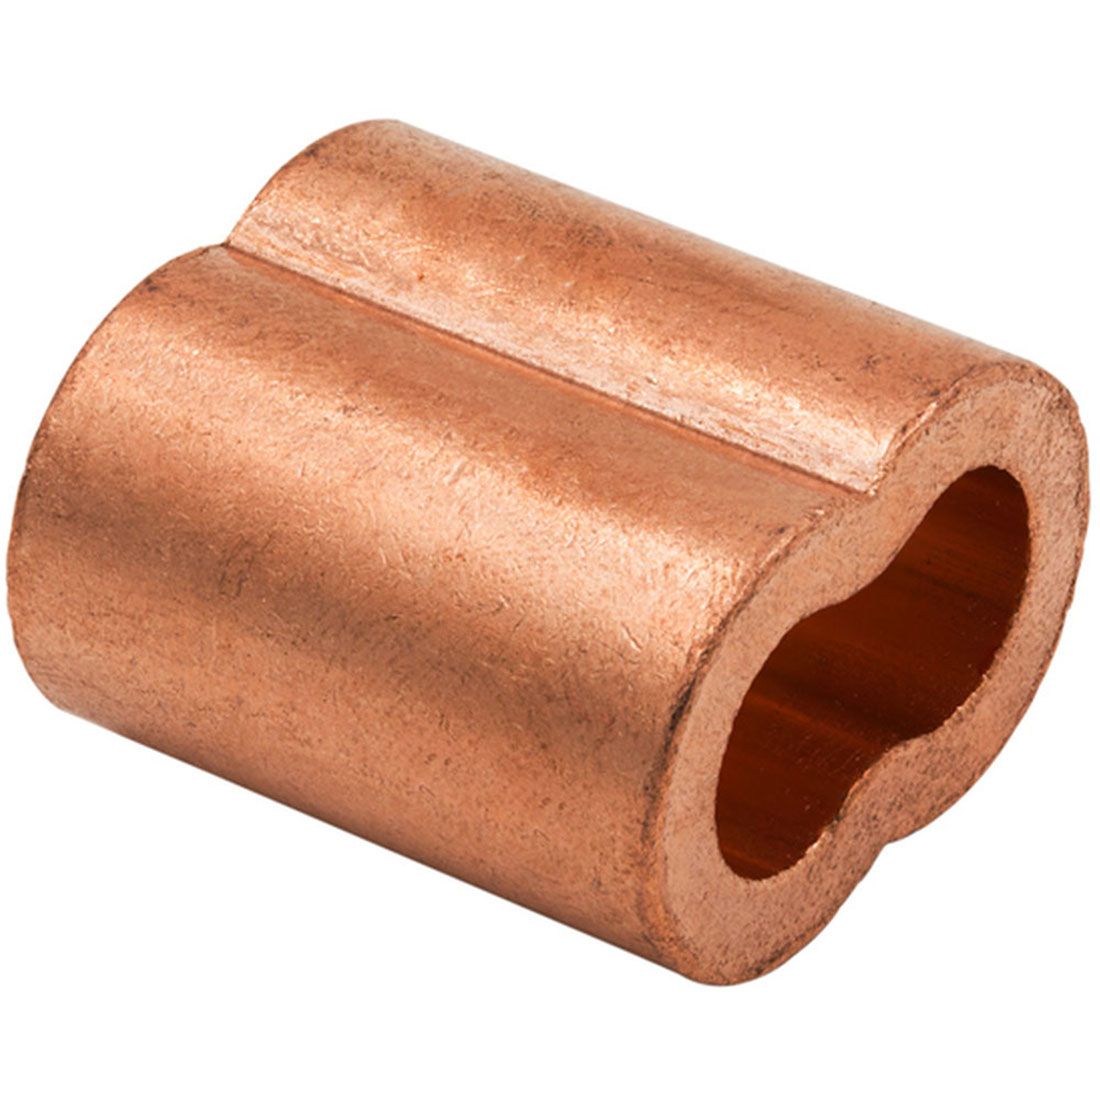 QTY 10 Size 3/8" Copper Swage Sleeves for Wire Rope Cable 